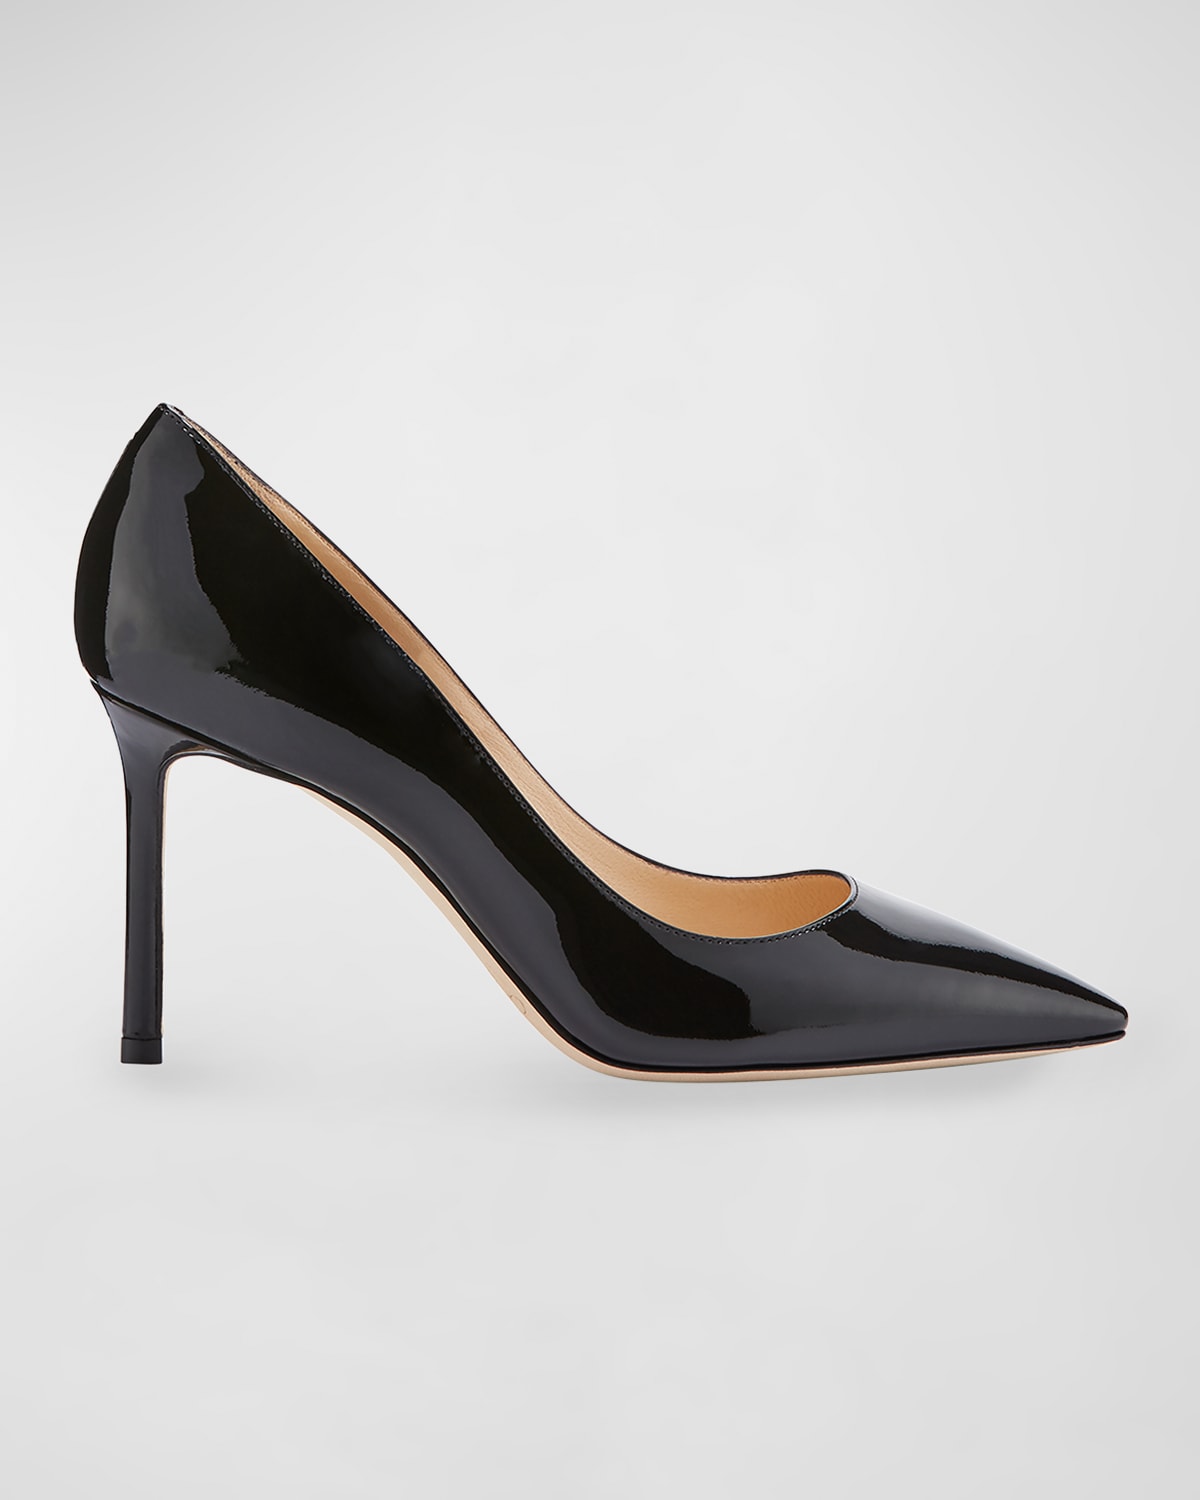 Romy Patent Pointed-Toe 85mm Pumps